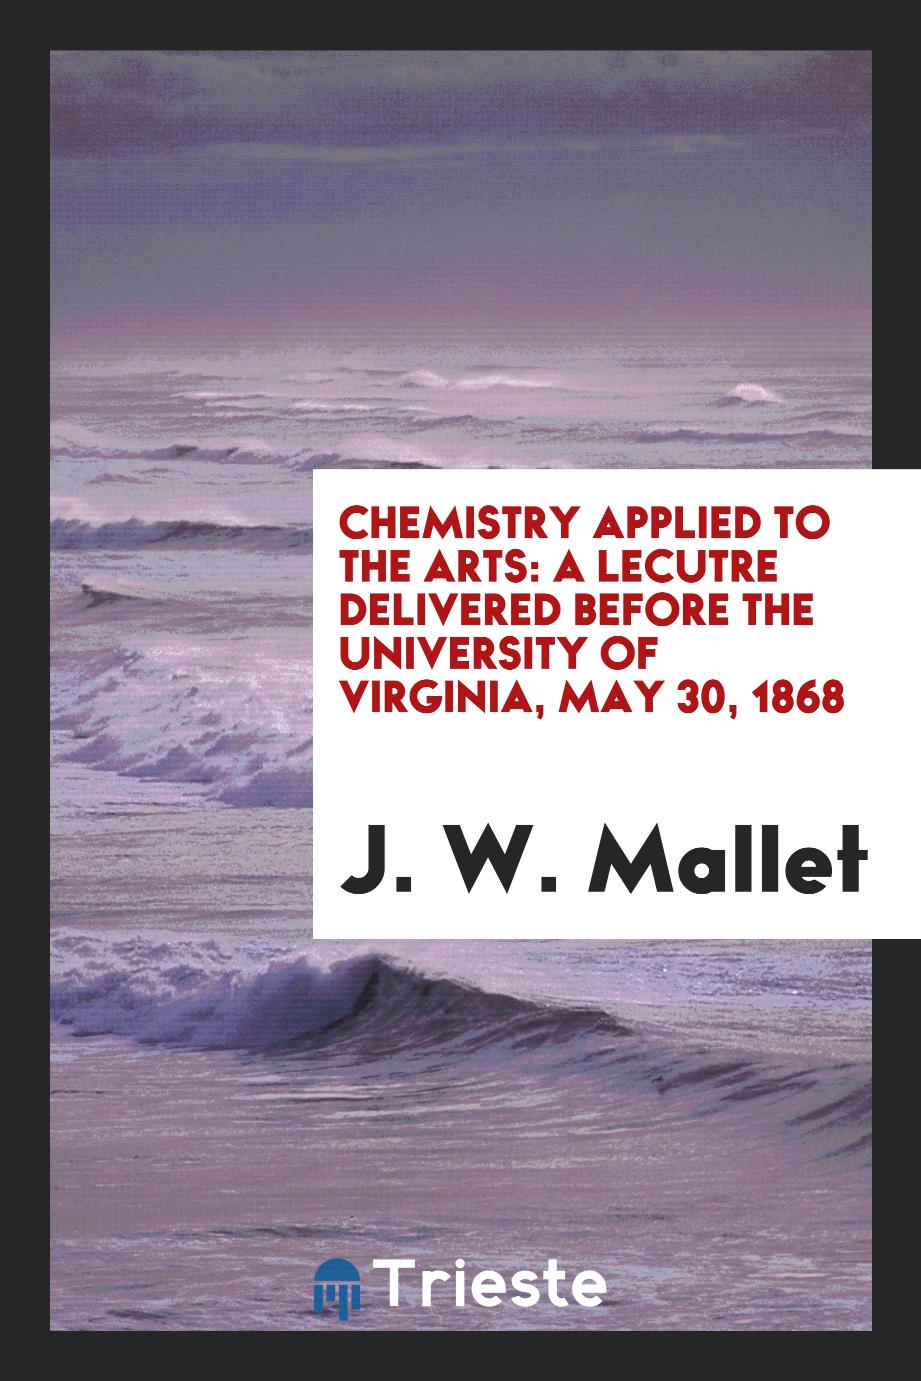 Chemistry Applied to the Arts: A Lecutre Delivered Before the University of Virginia, May 30, 1868